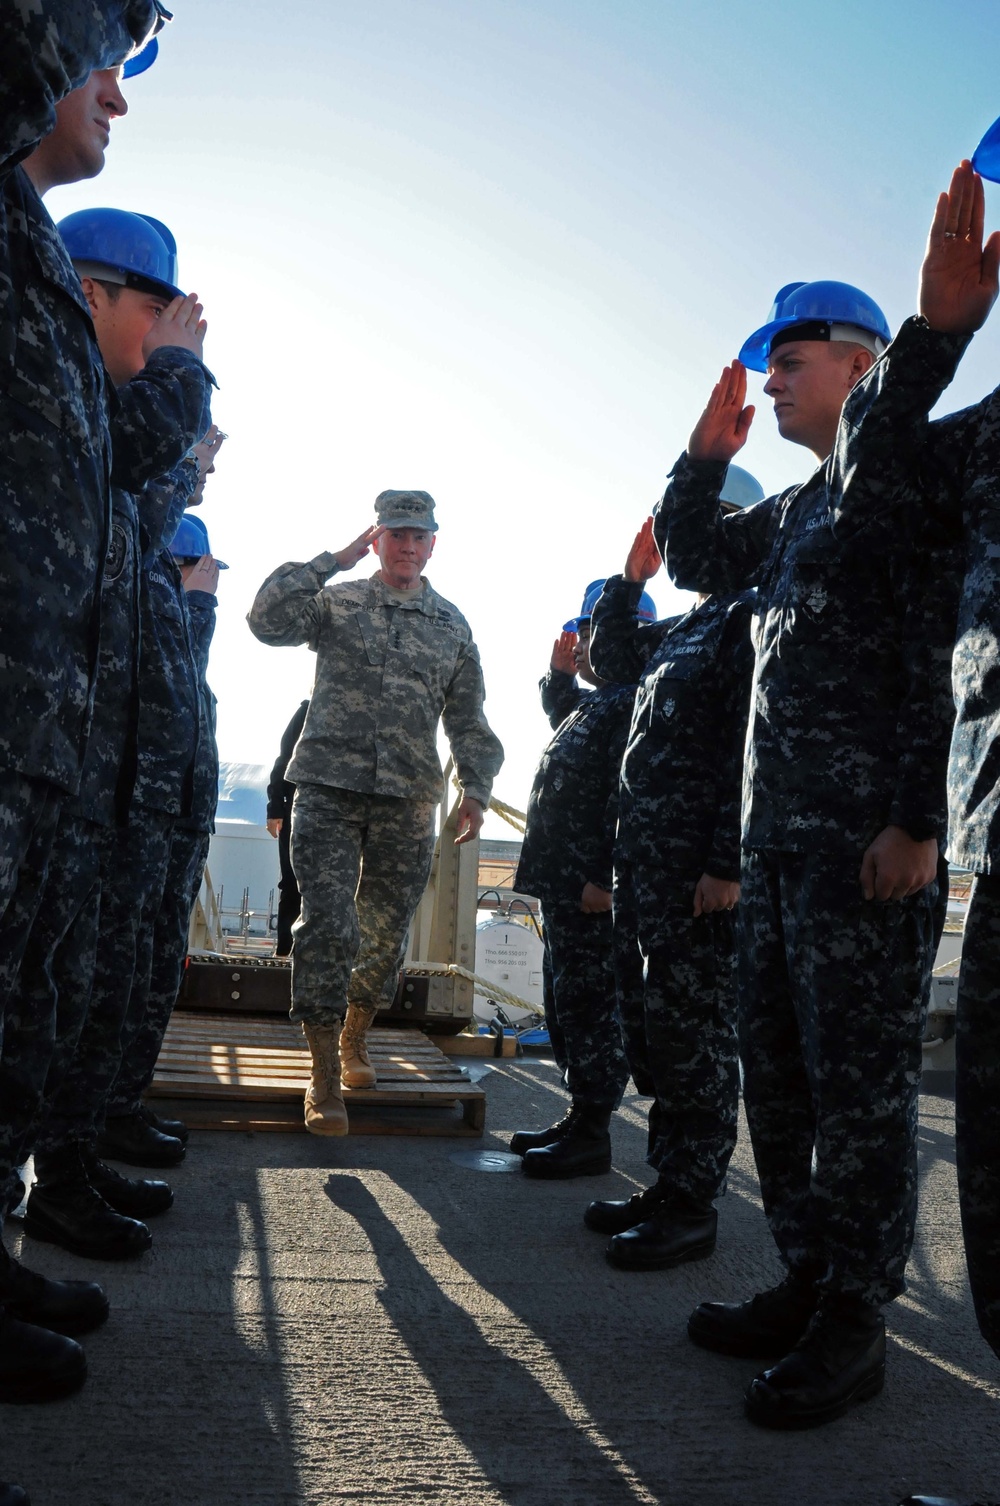 Chairman of Joint Chiefs visits Naval Station Rota